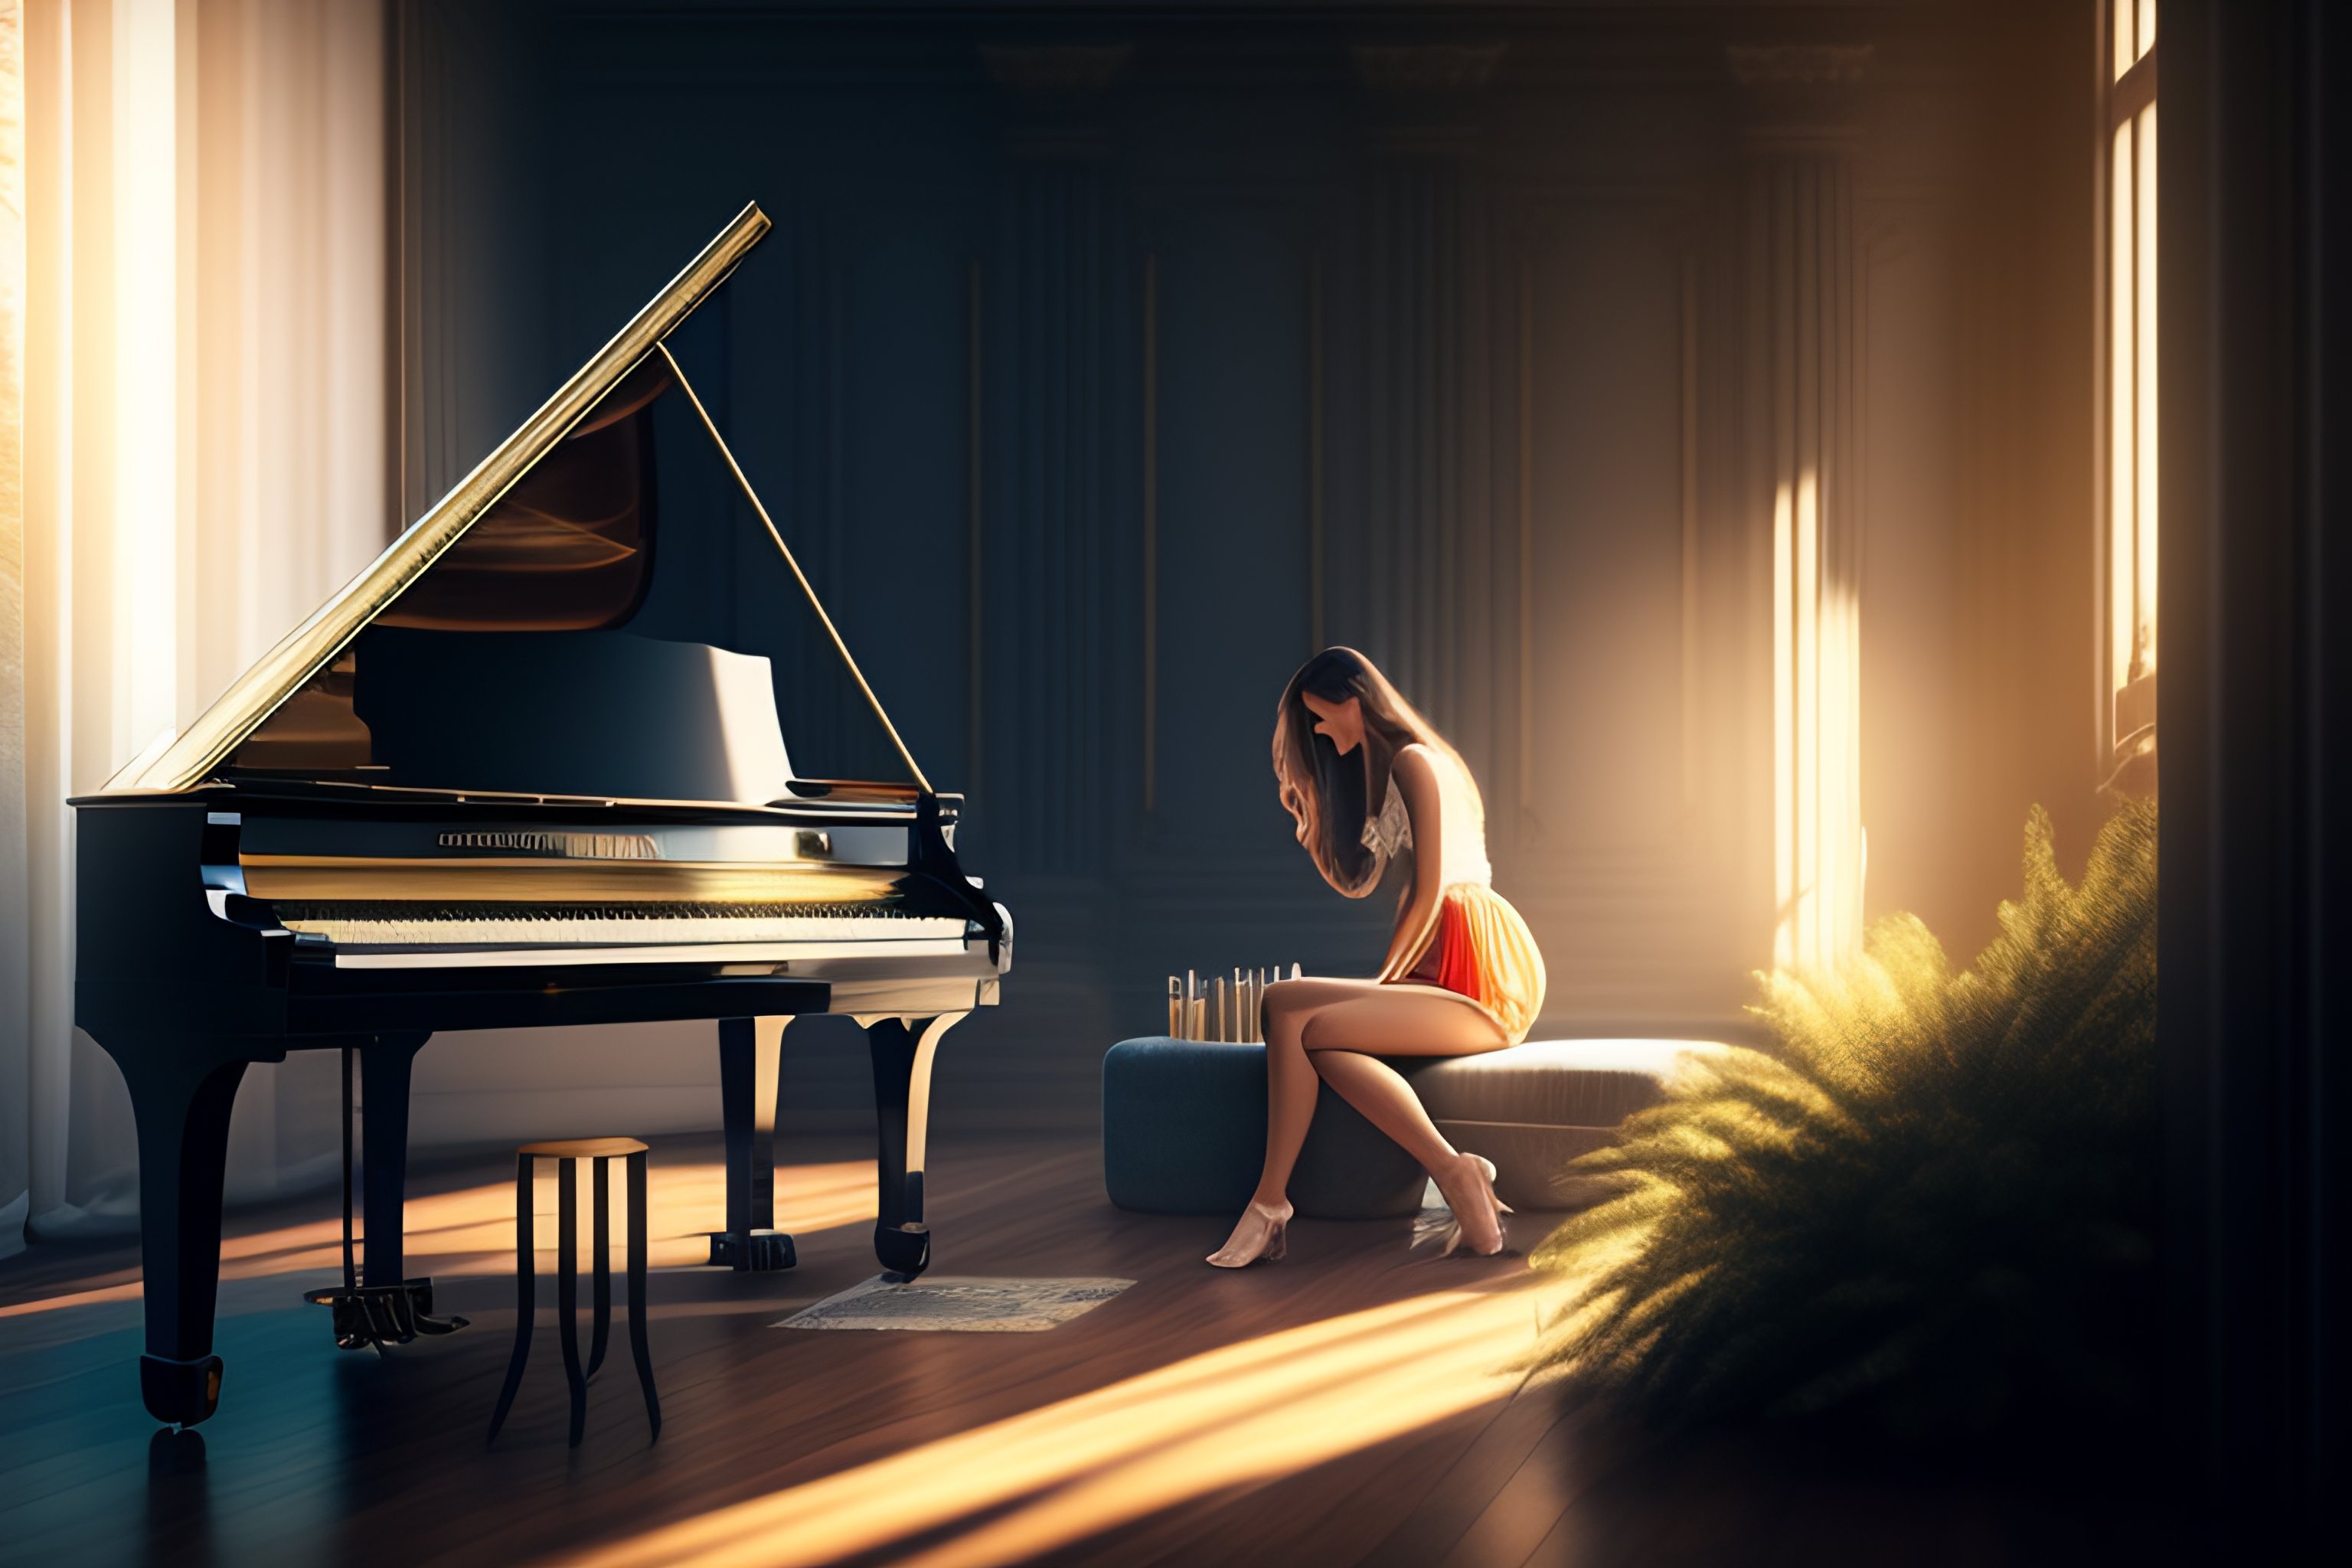 Lexica The Most Beautiful Elegant Woman Playing Piano Wearing Jeans